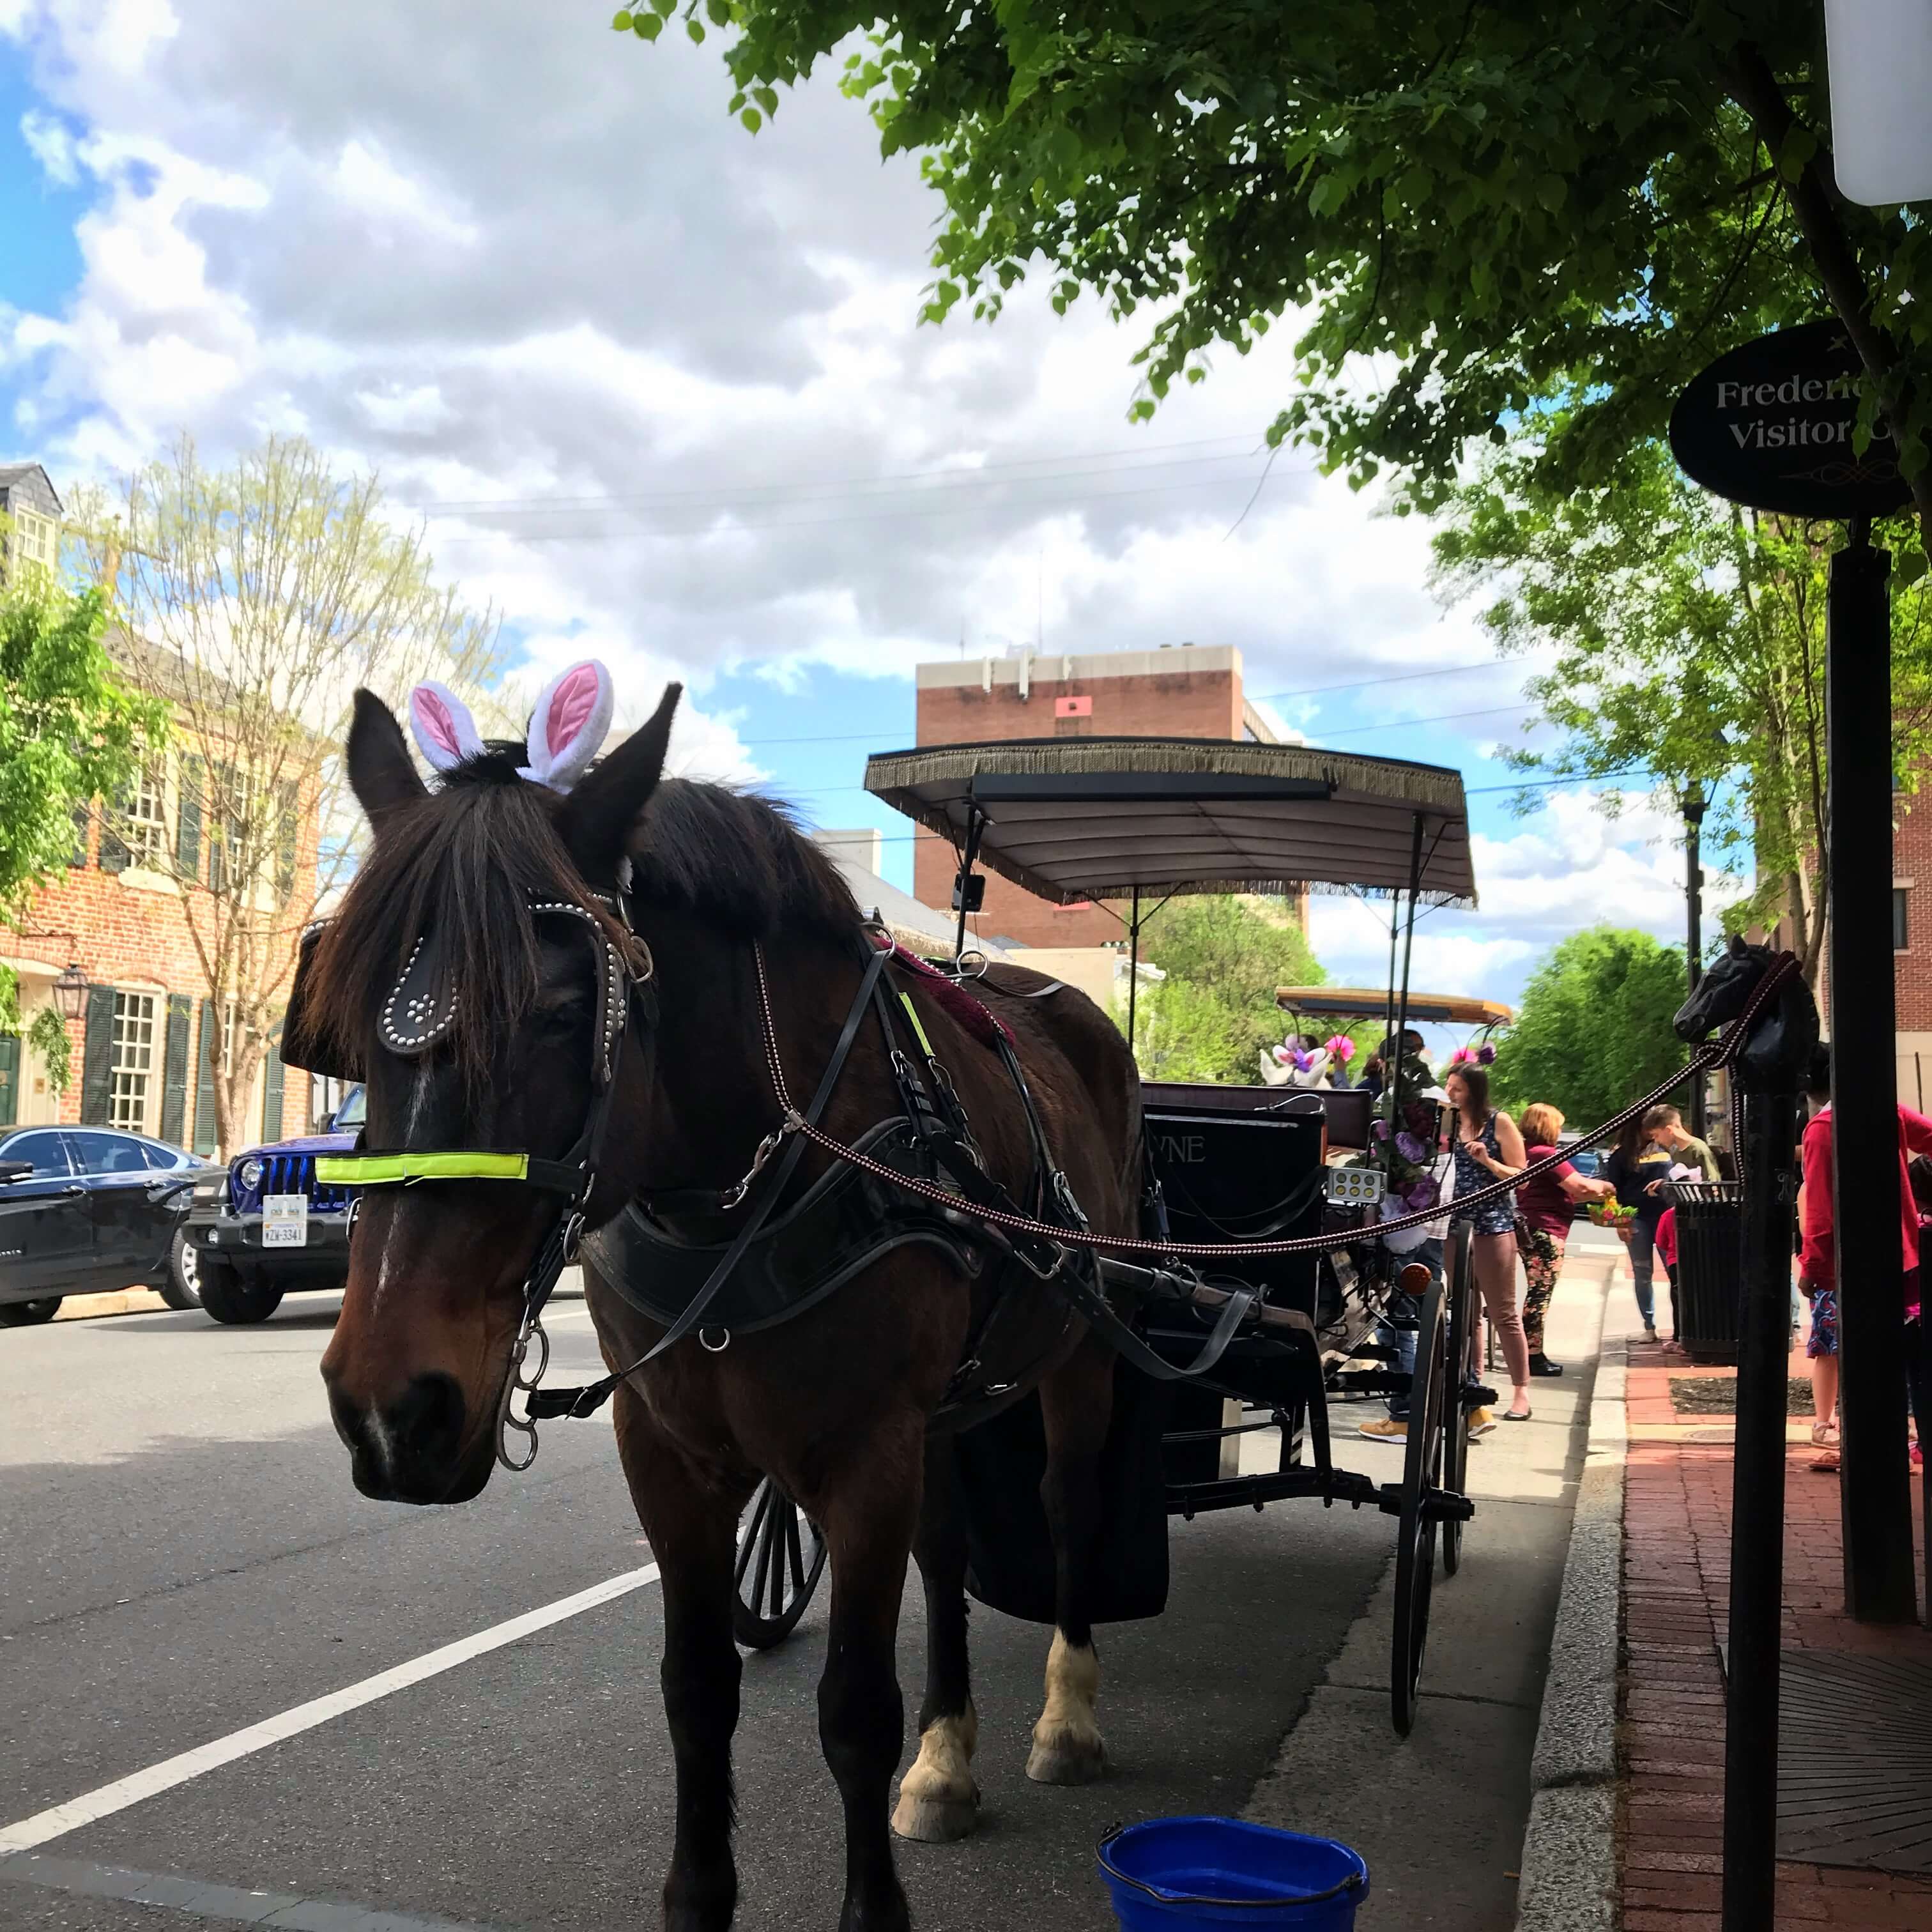 Photo of the Horse from the Carriage ride in downtown Fredericksburg wearing bunny ears at Easter time